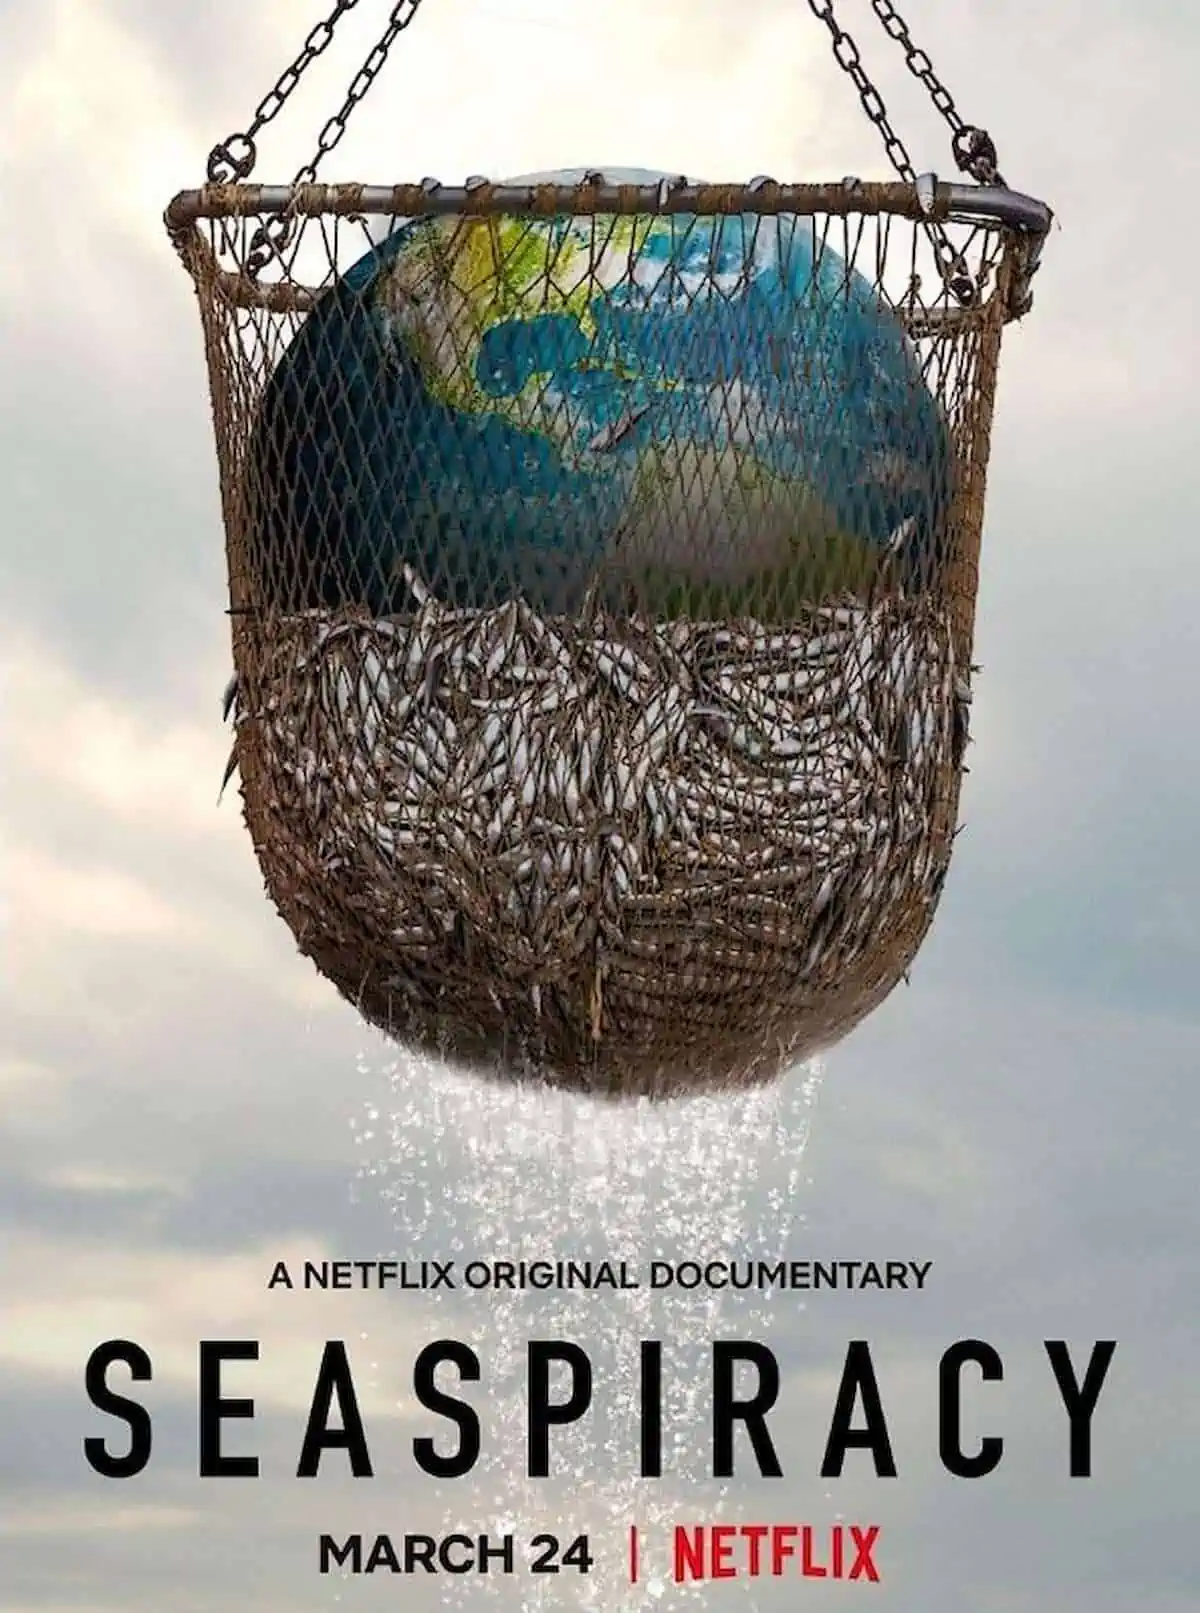 Documentary poster for Seaspiracy with a large fishing net holding fish and the world.